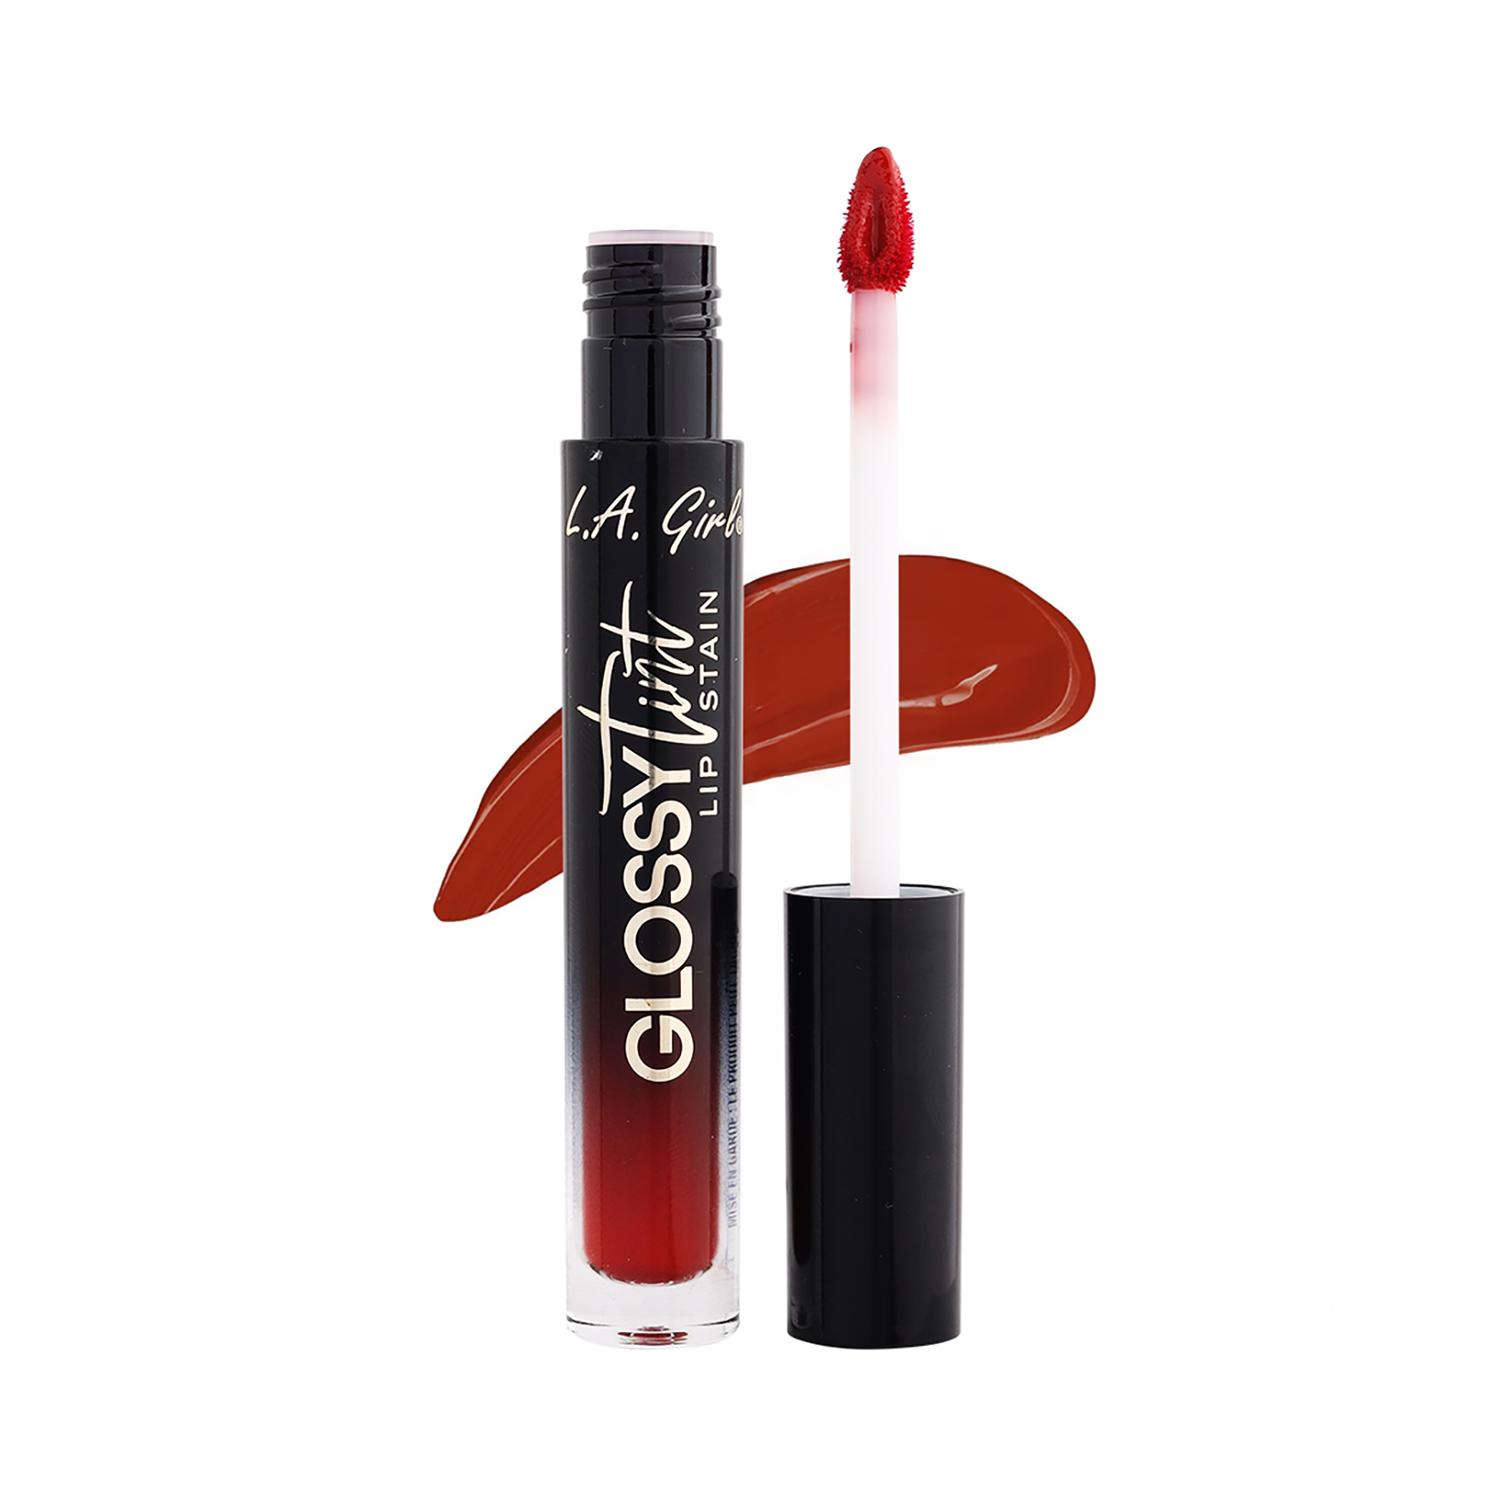 L.A. Girl | L.A. Girl Glossy Tint Lip Stain - GLC708 Captivating (2.9g)